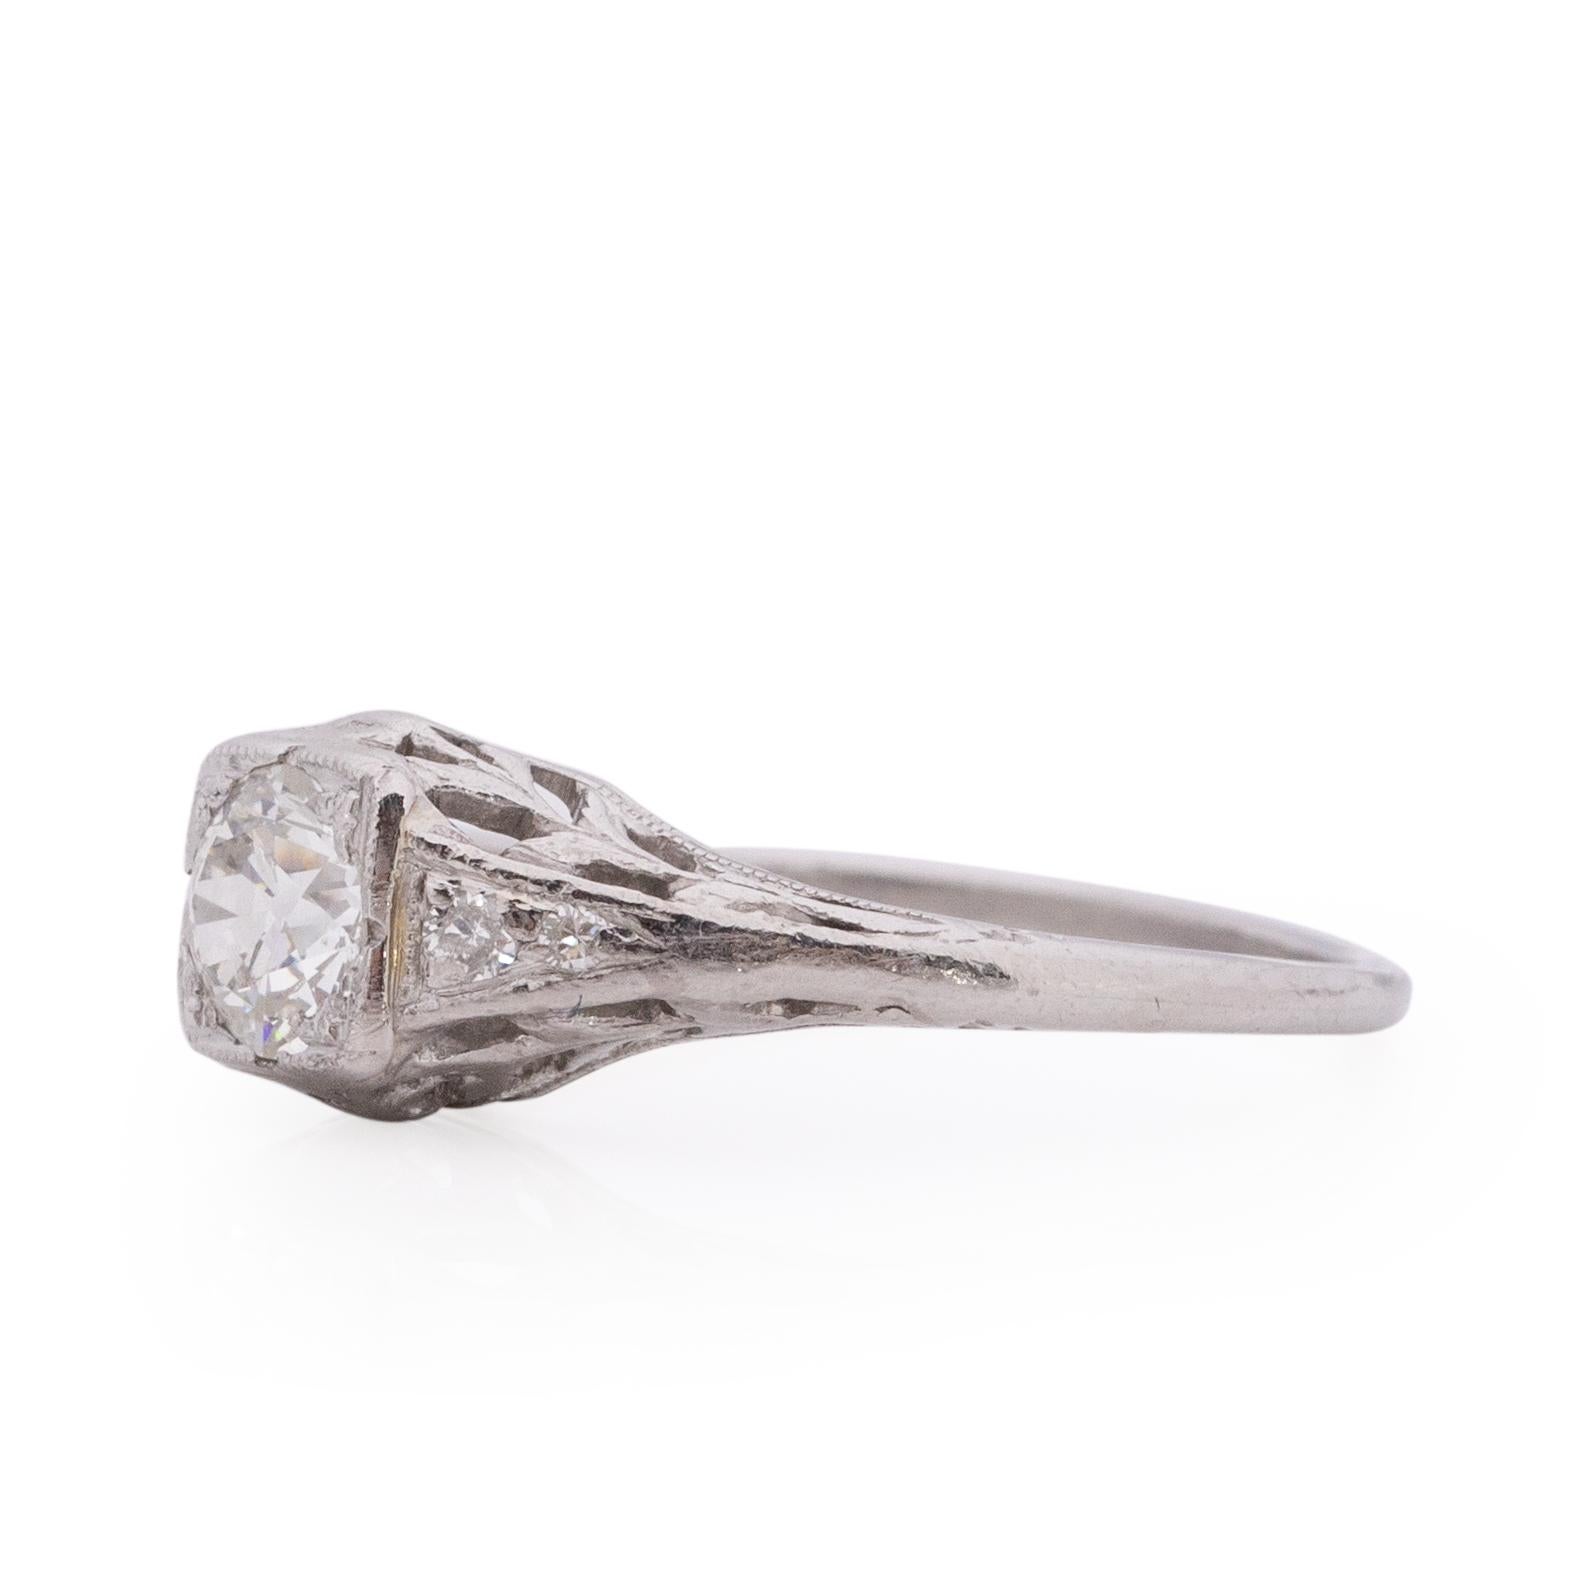 Here we have a beautiful solitaire engagement ring from the Edwardian era. Typical from this era the ring is crafted in platinum, with filigree details  giving off a floral femininity. In the center is a vibrant .50-.55Ct old European cut diamond